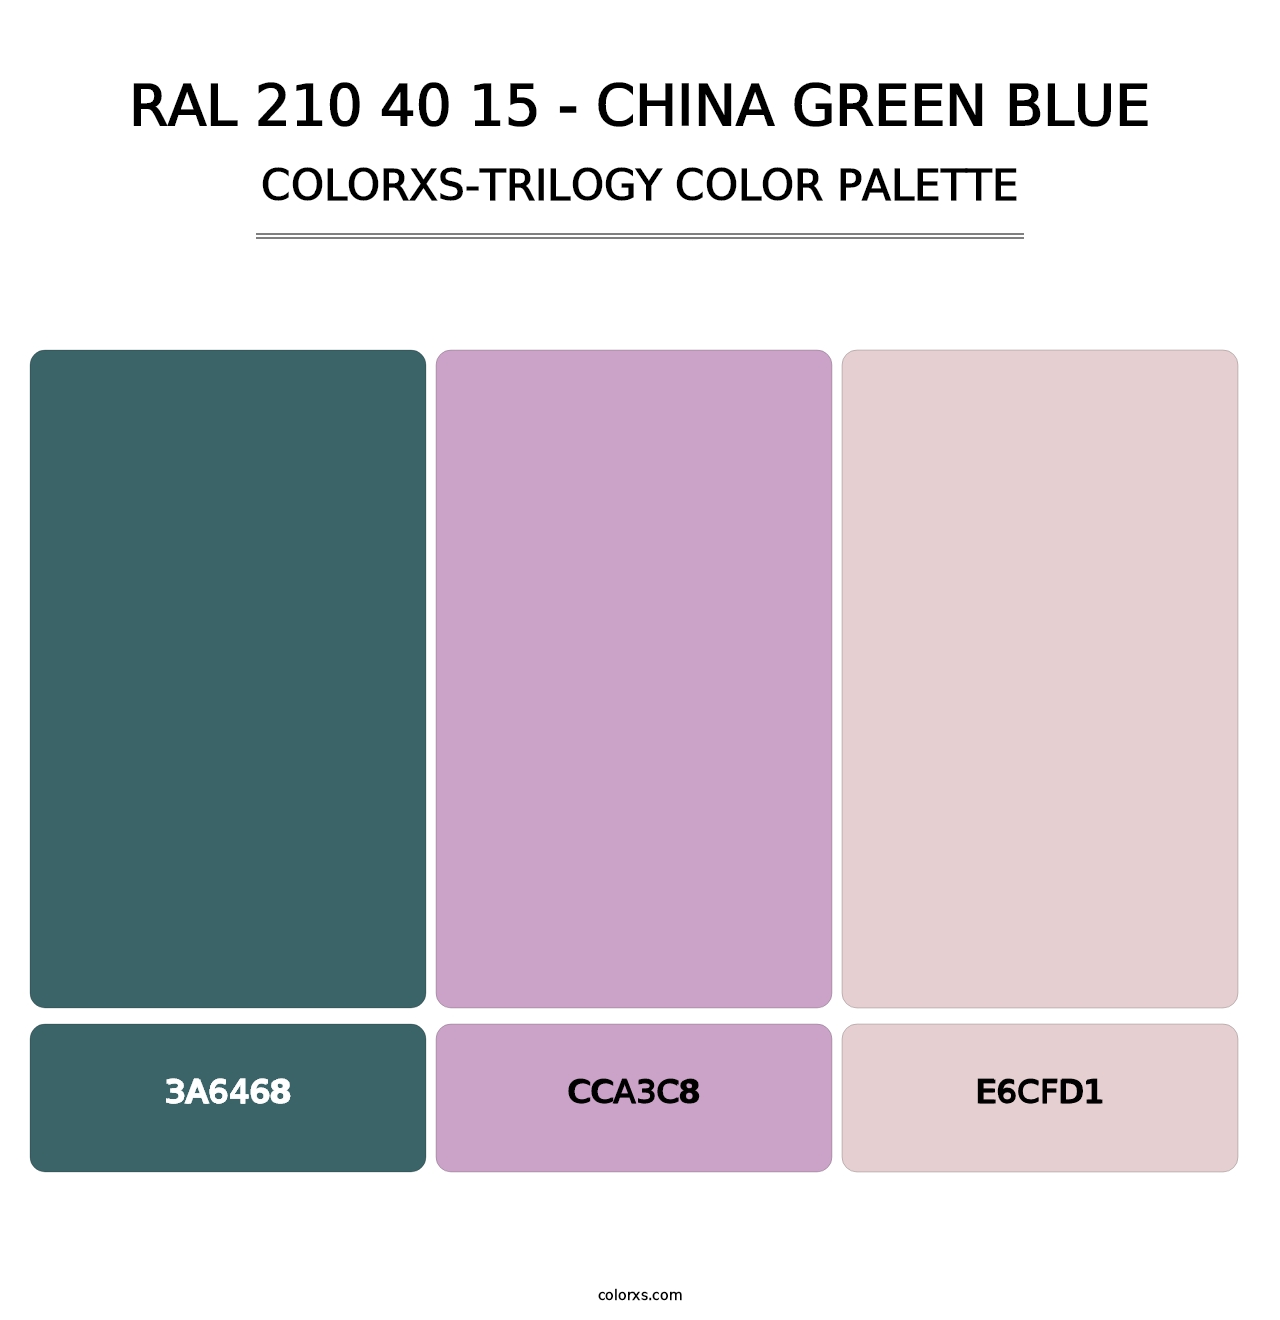 RAL 210 40 15 - China Green Blue - Colorxs Trilogy Palette